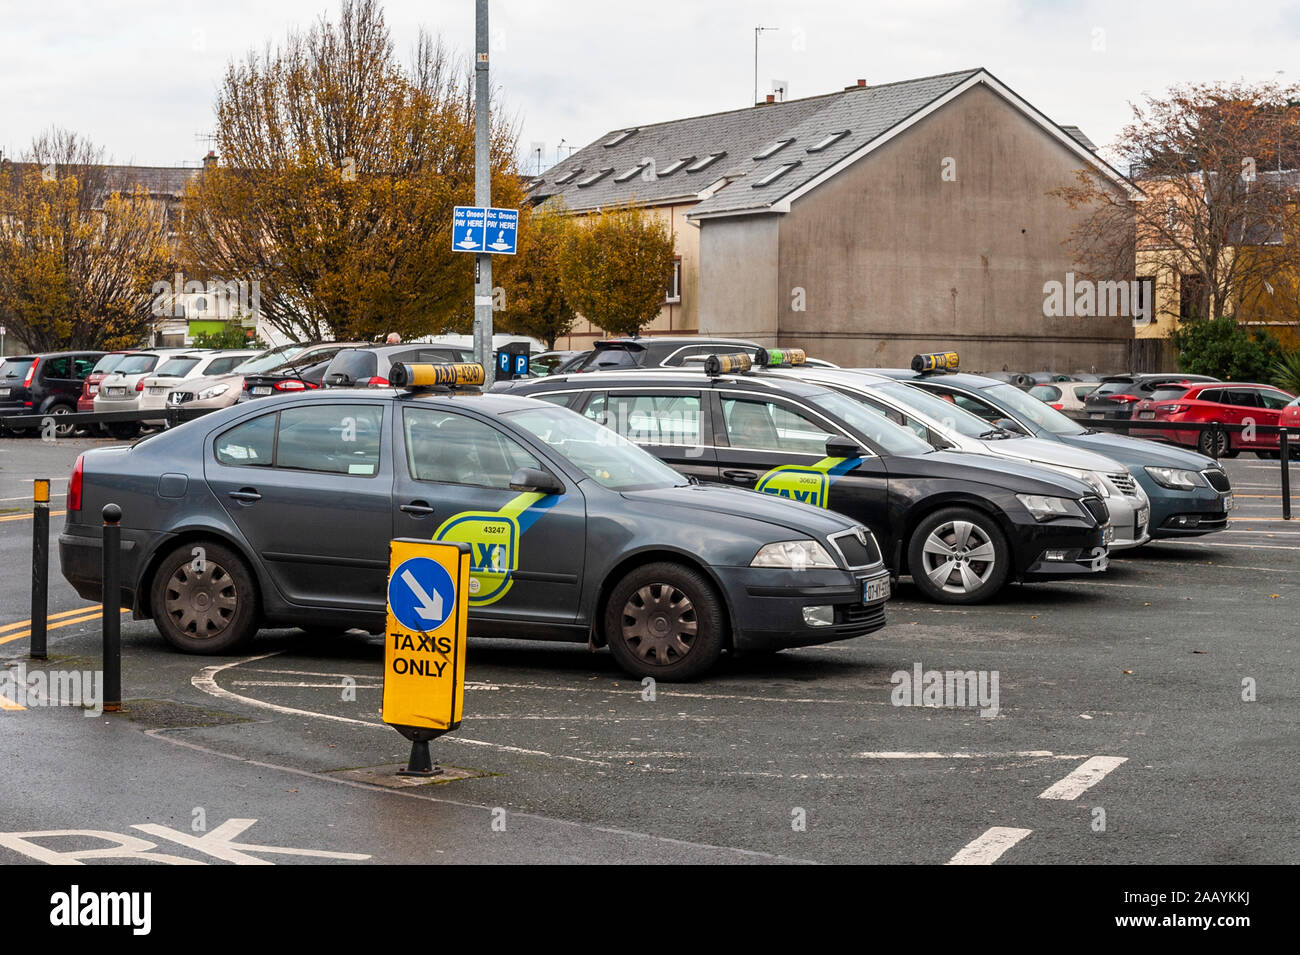 Taxi rank full of taxis waiting for fares in Killarney, County Kerry, Ireland. Stock Photo